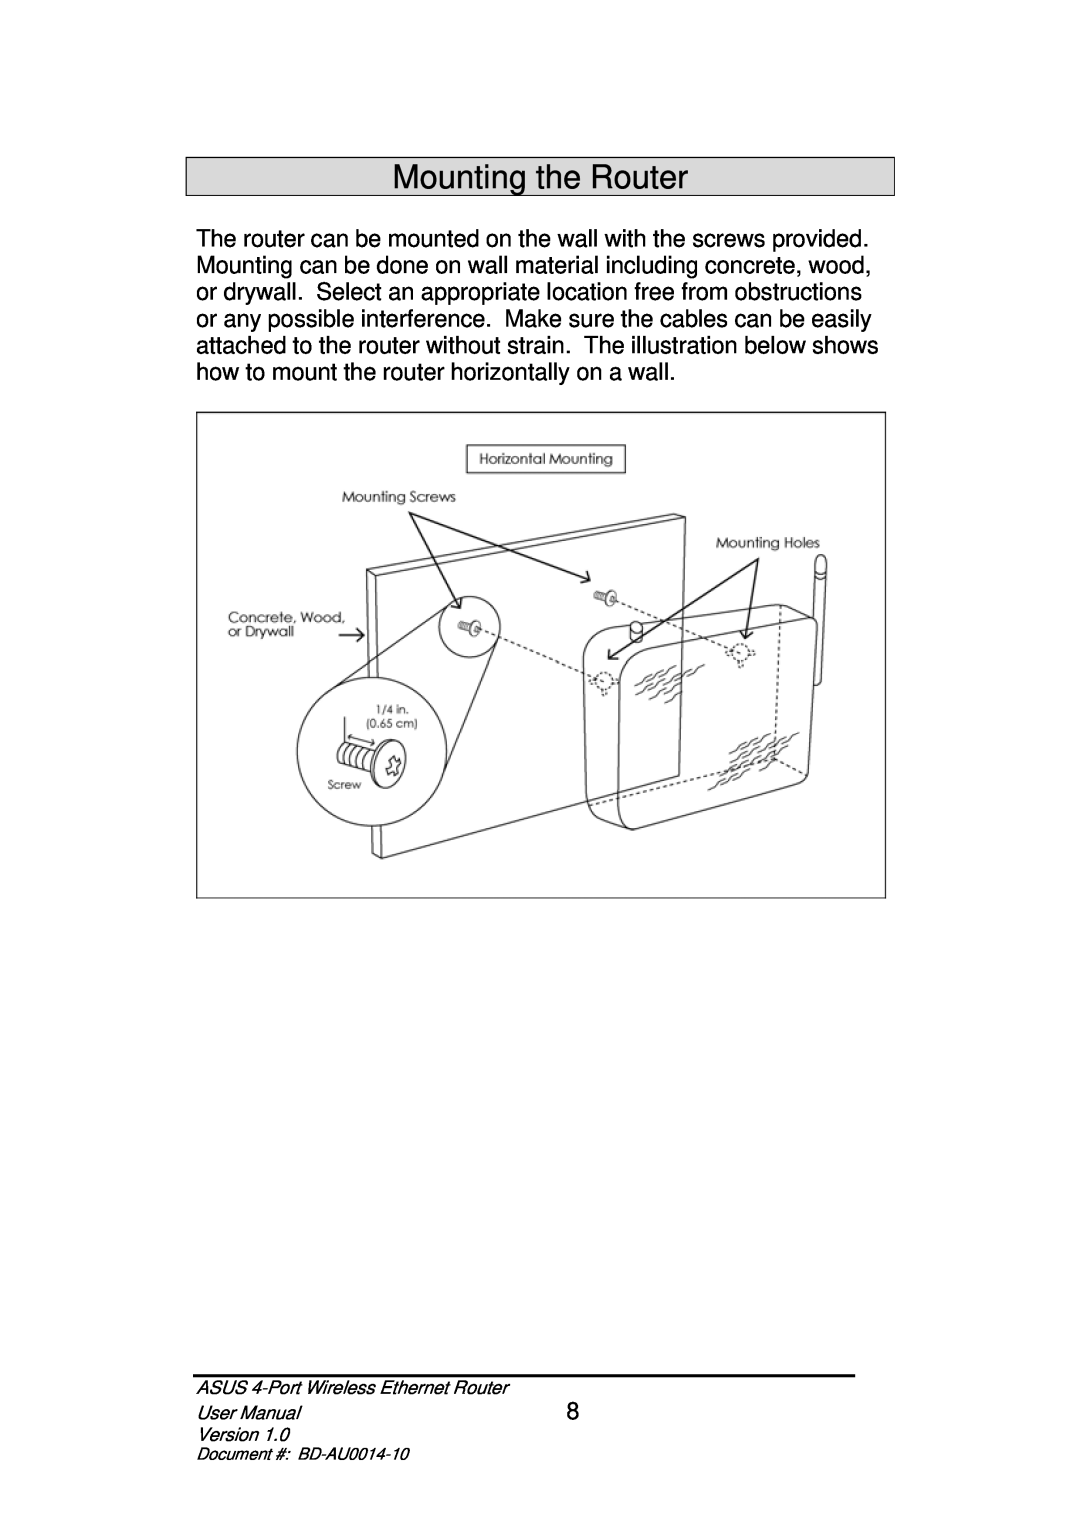 Asus BD-AU0014-10 user manual Mounting the Router 